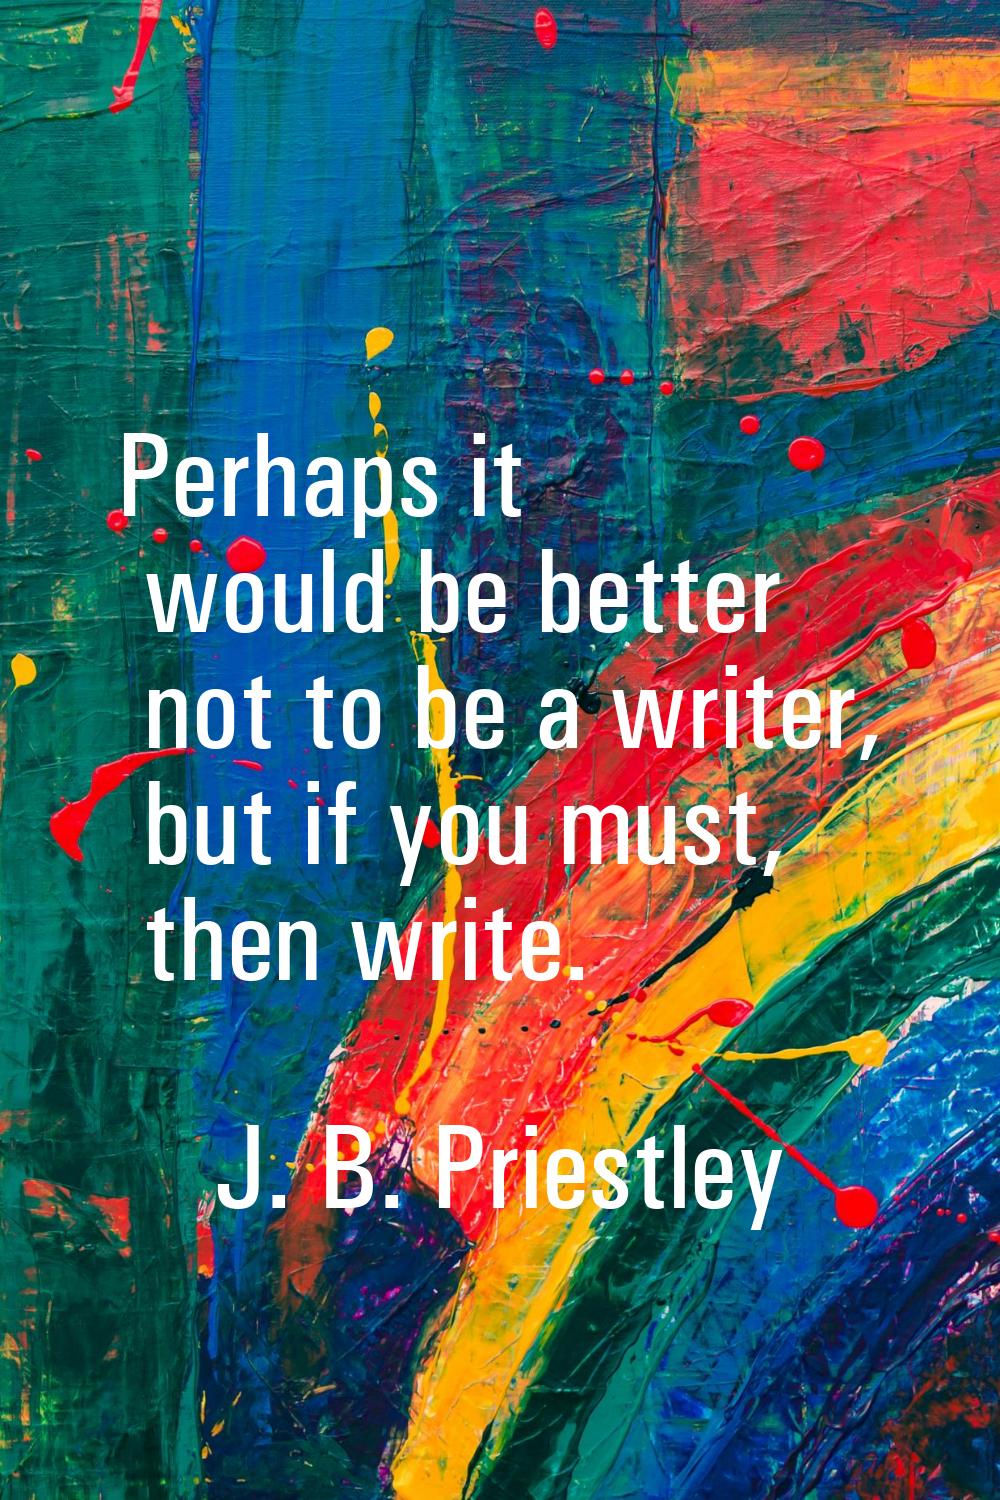 Perhaps it would be better not to be a writer, but if you must, then write.